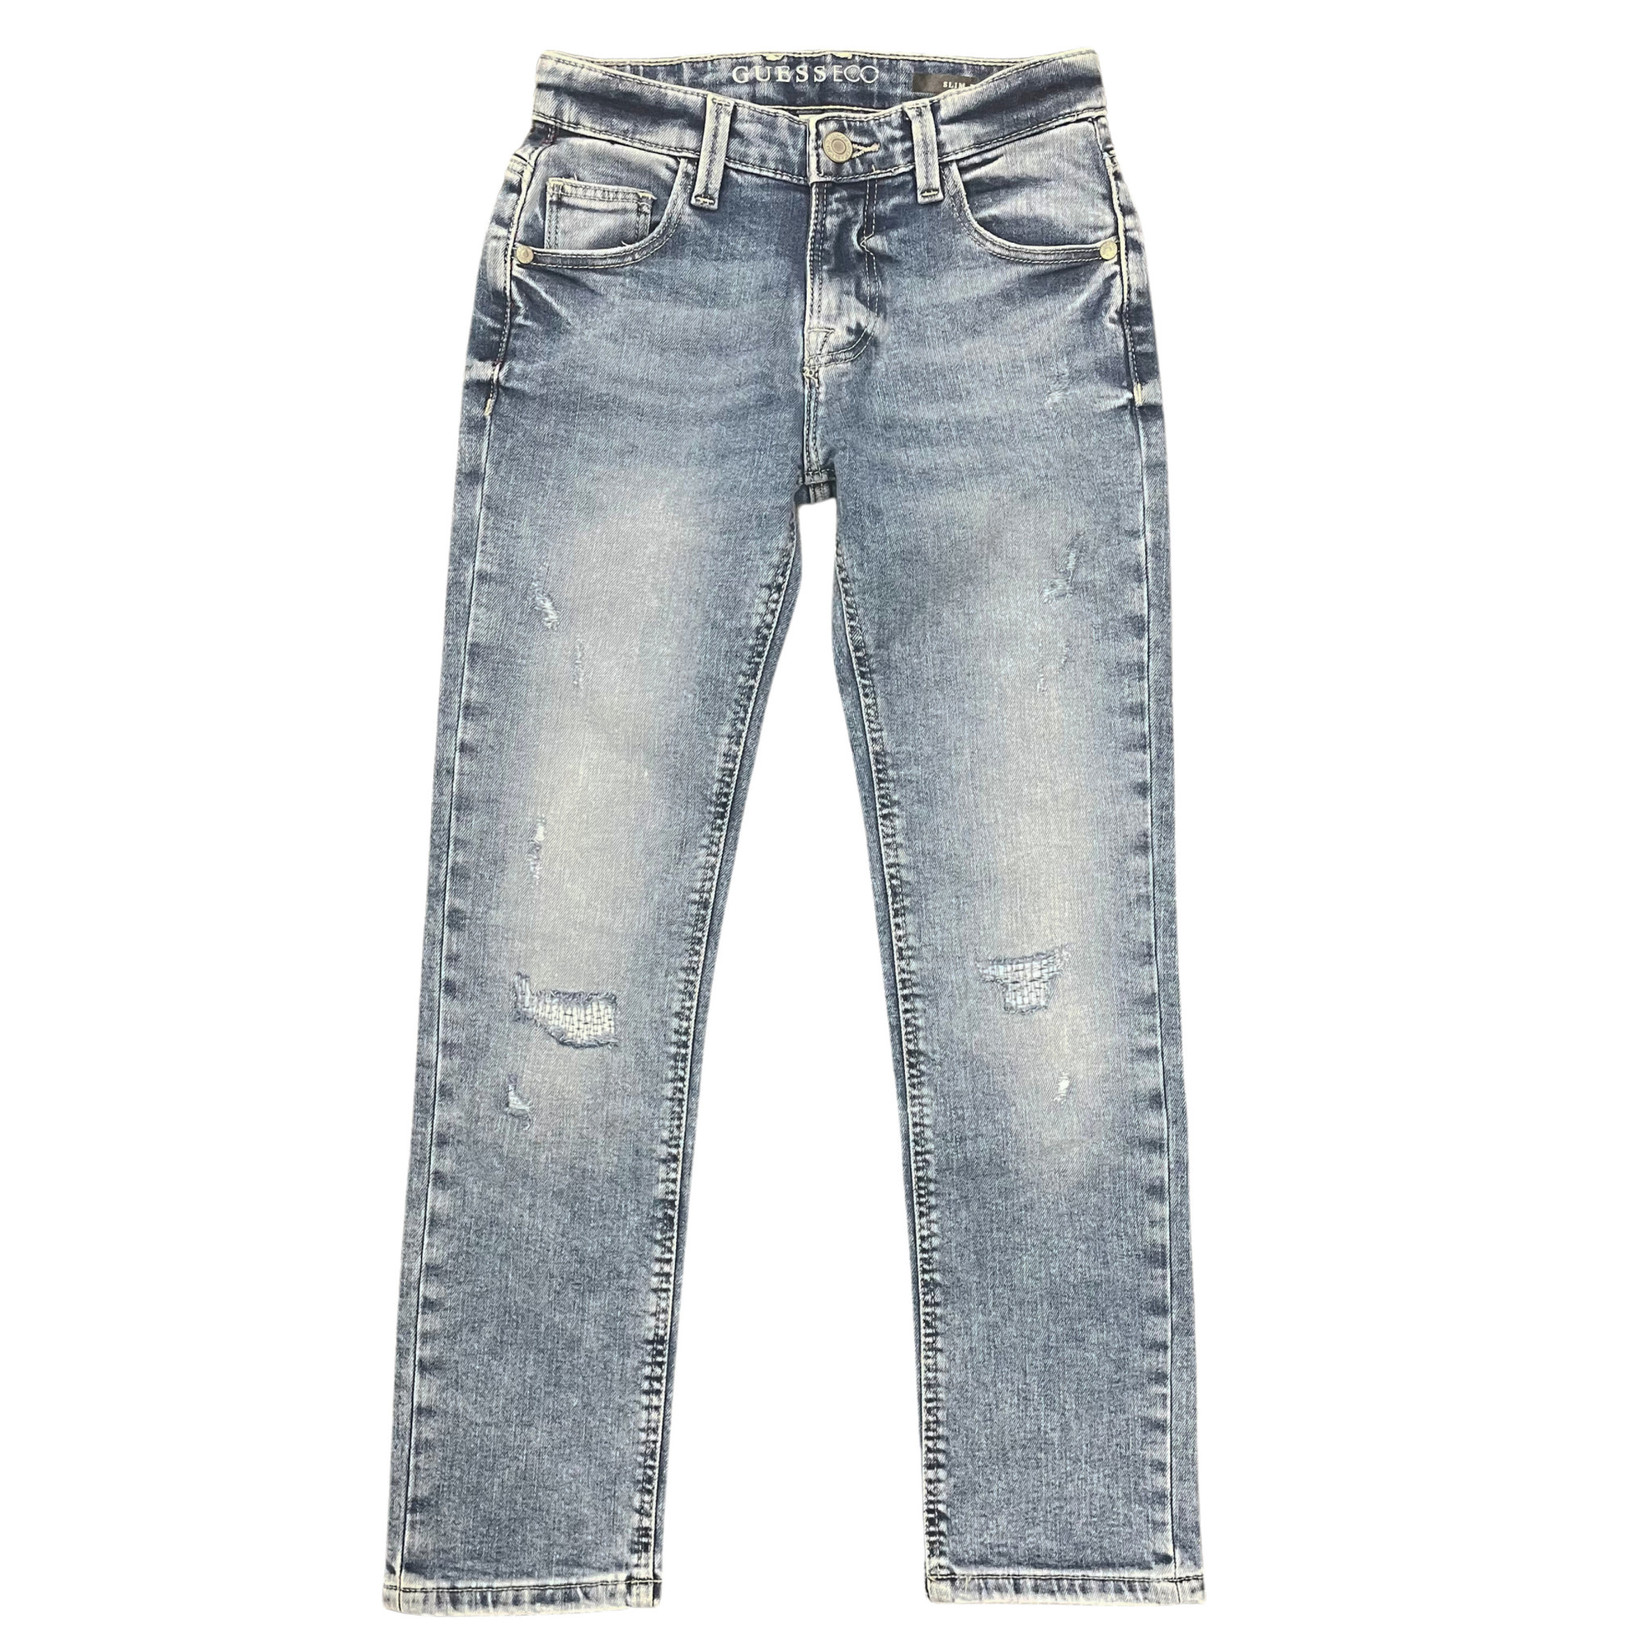 Guess Guess - Boys Slim Fit Jeans